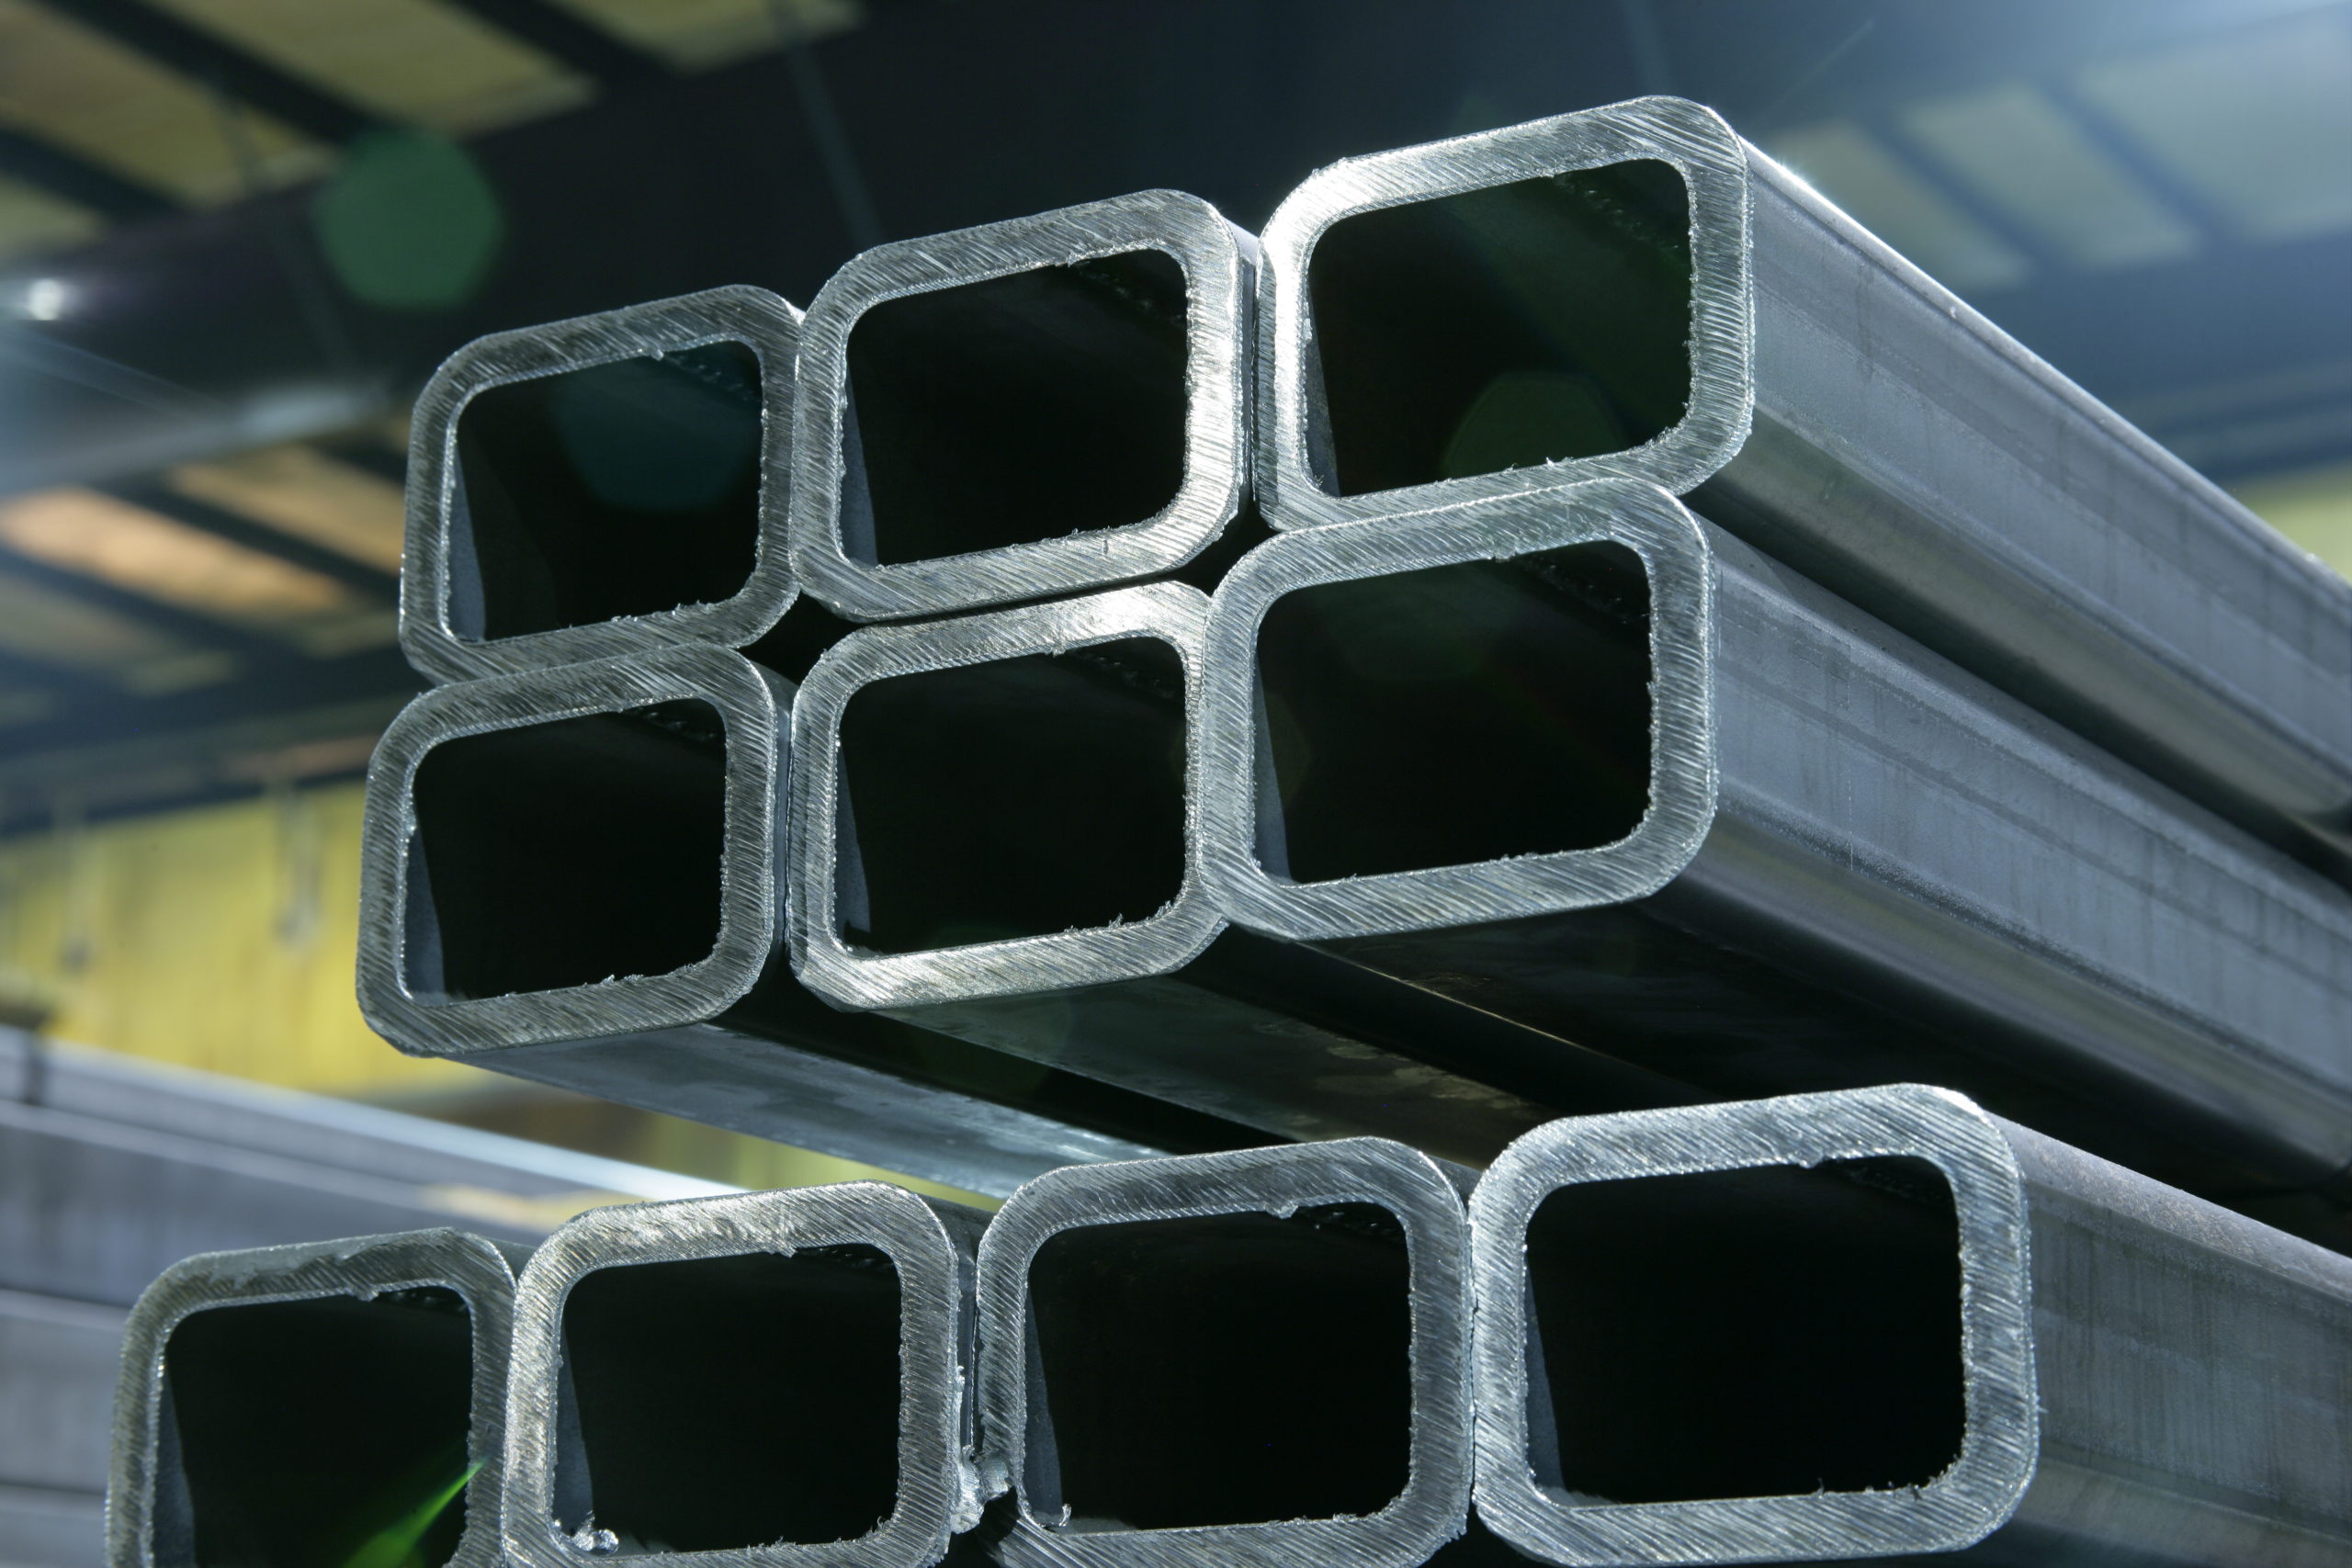 YL9X0162 scaled Hollow Structural Sections (HSS) Product Overview & Benefits